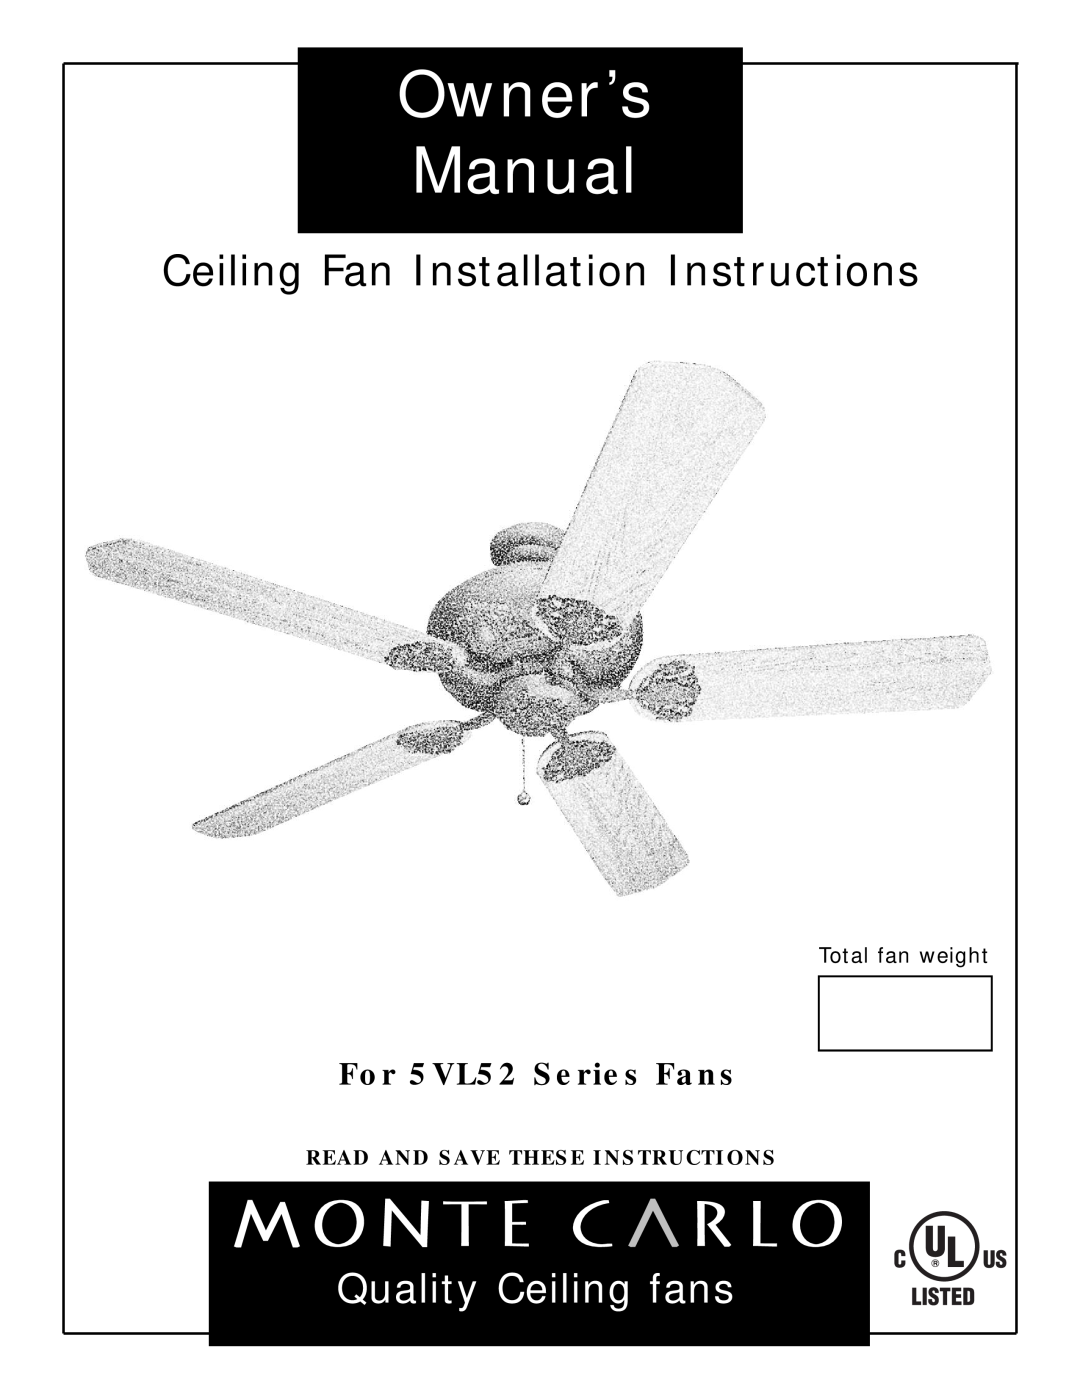 Monte Carlo Fan Company owner manual For 5VL52 Series Fans, Total fan weight, Read And Save These Instructions 